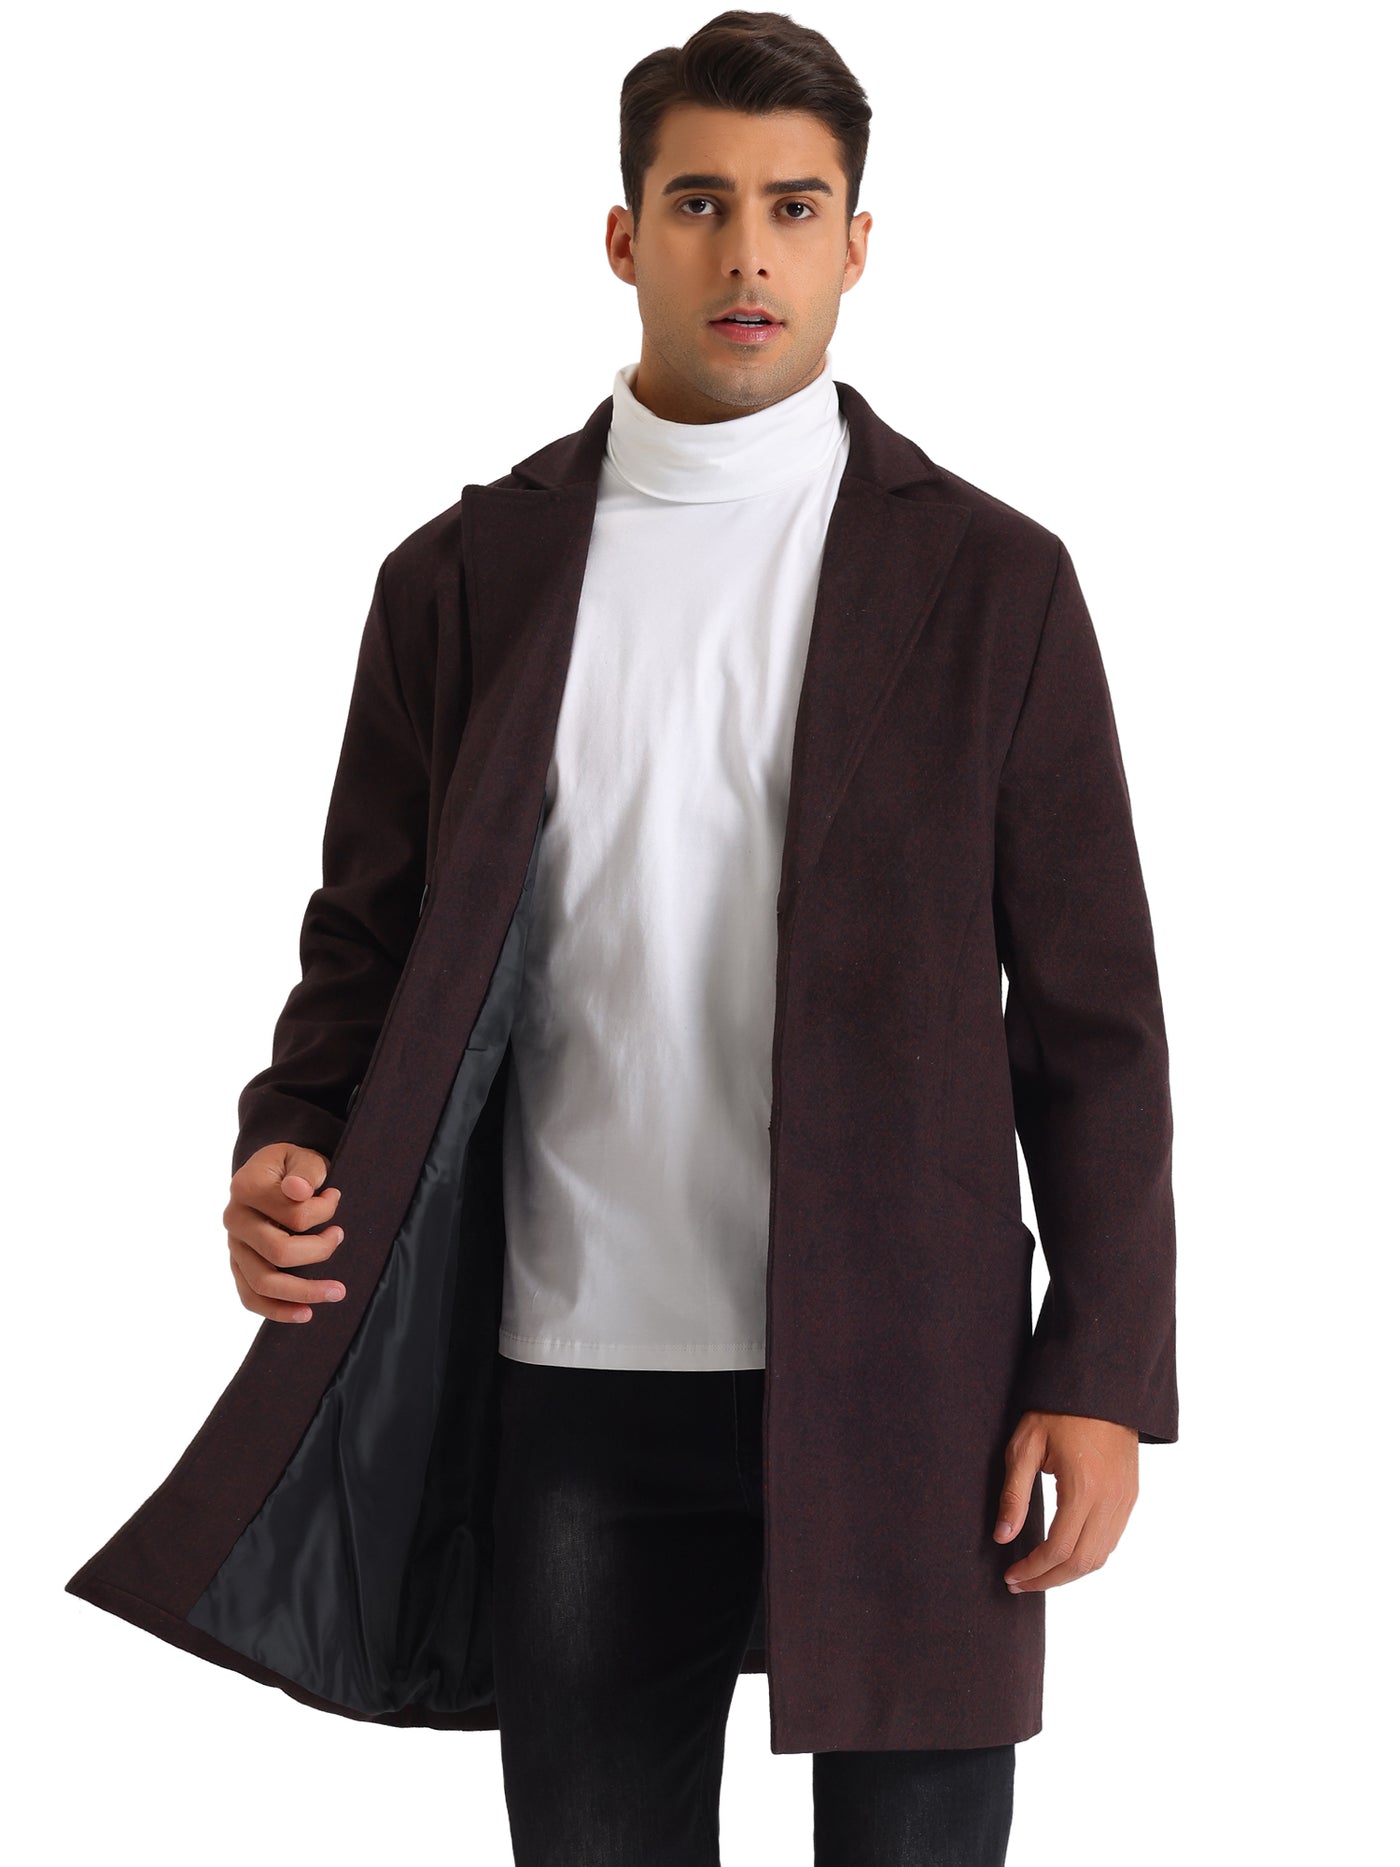 Bublédon Trench Coat for Men's Slim Fit Single Breasted Business Winter Overcoat